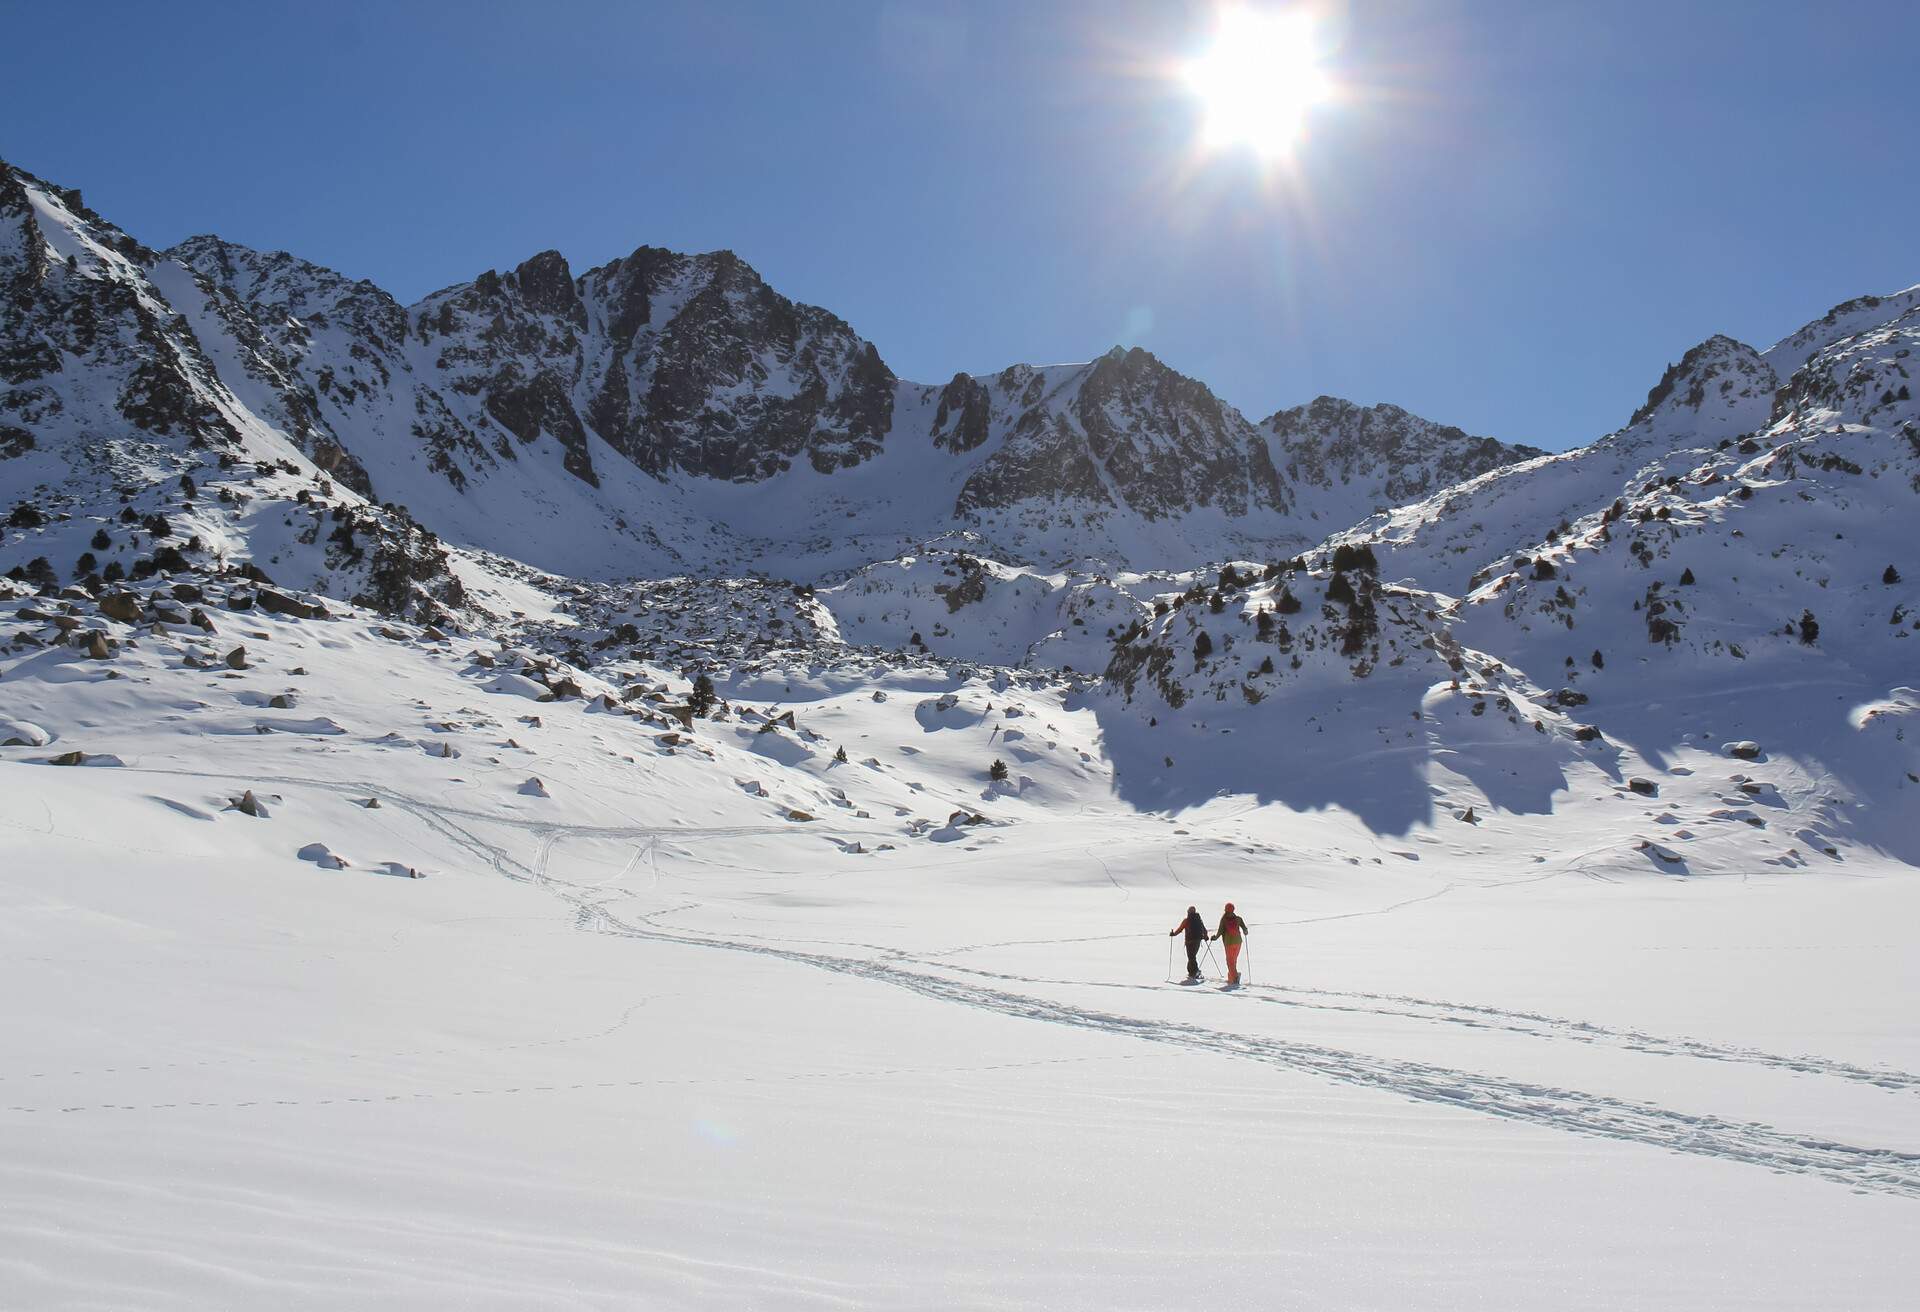 Two skiers inside beautiful snow capped mountains under a blue sky on a beautiful winter's day